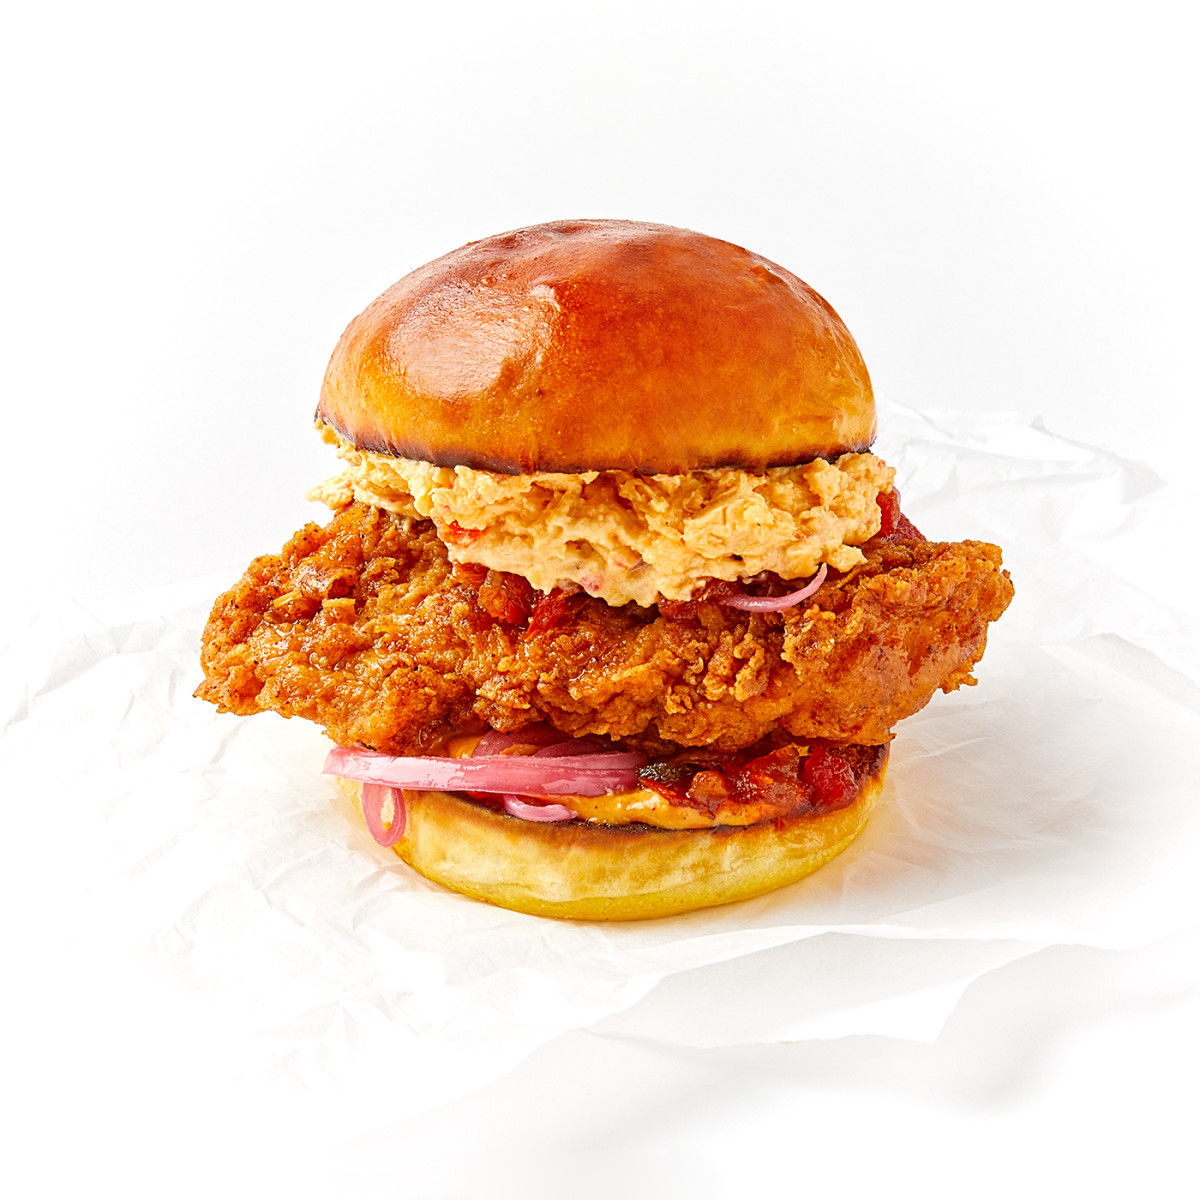 e-commerce food photograph of fried chicken sandwich on parchment paper on white background